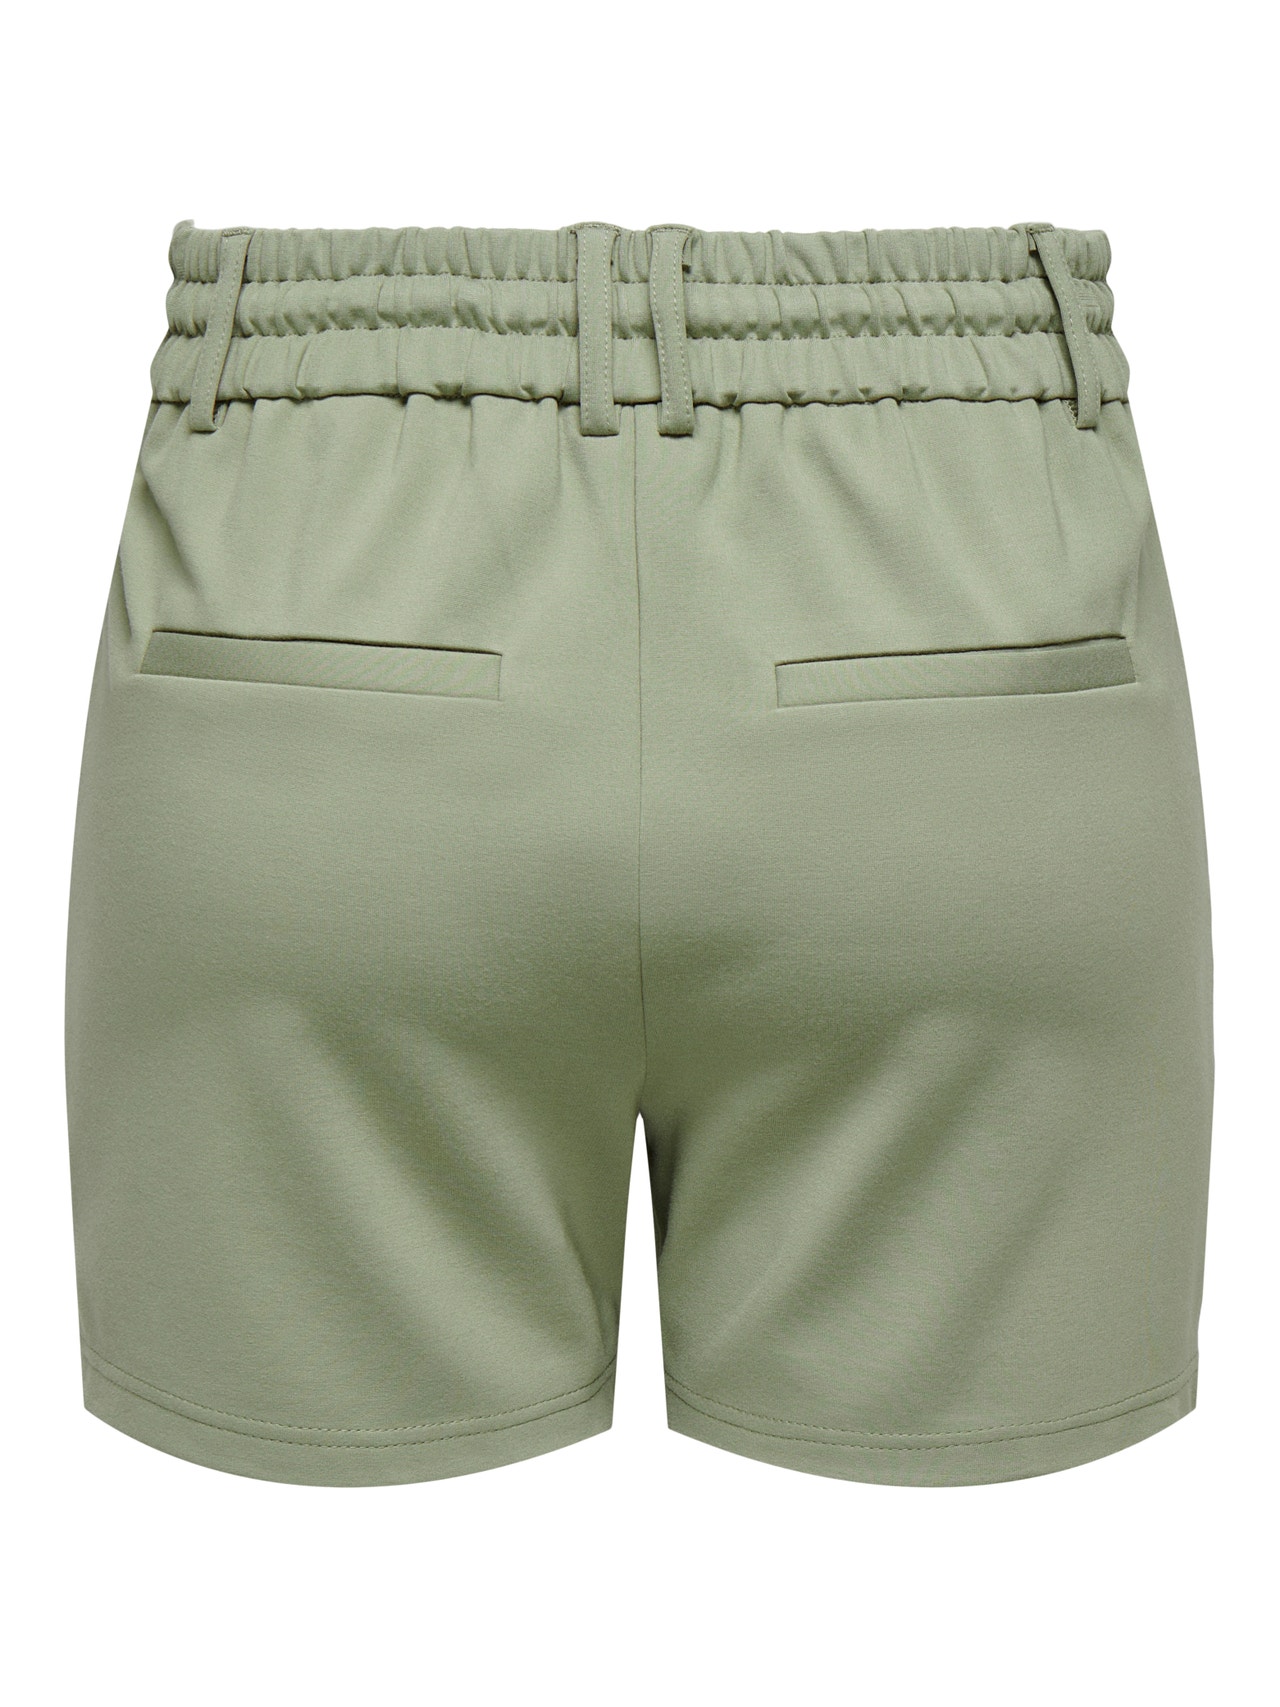 ONLY Regular Fit Shorts -Seagrass - 15127107